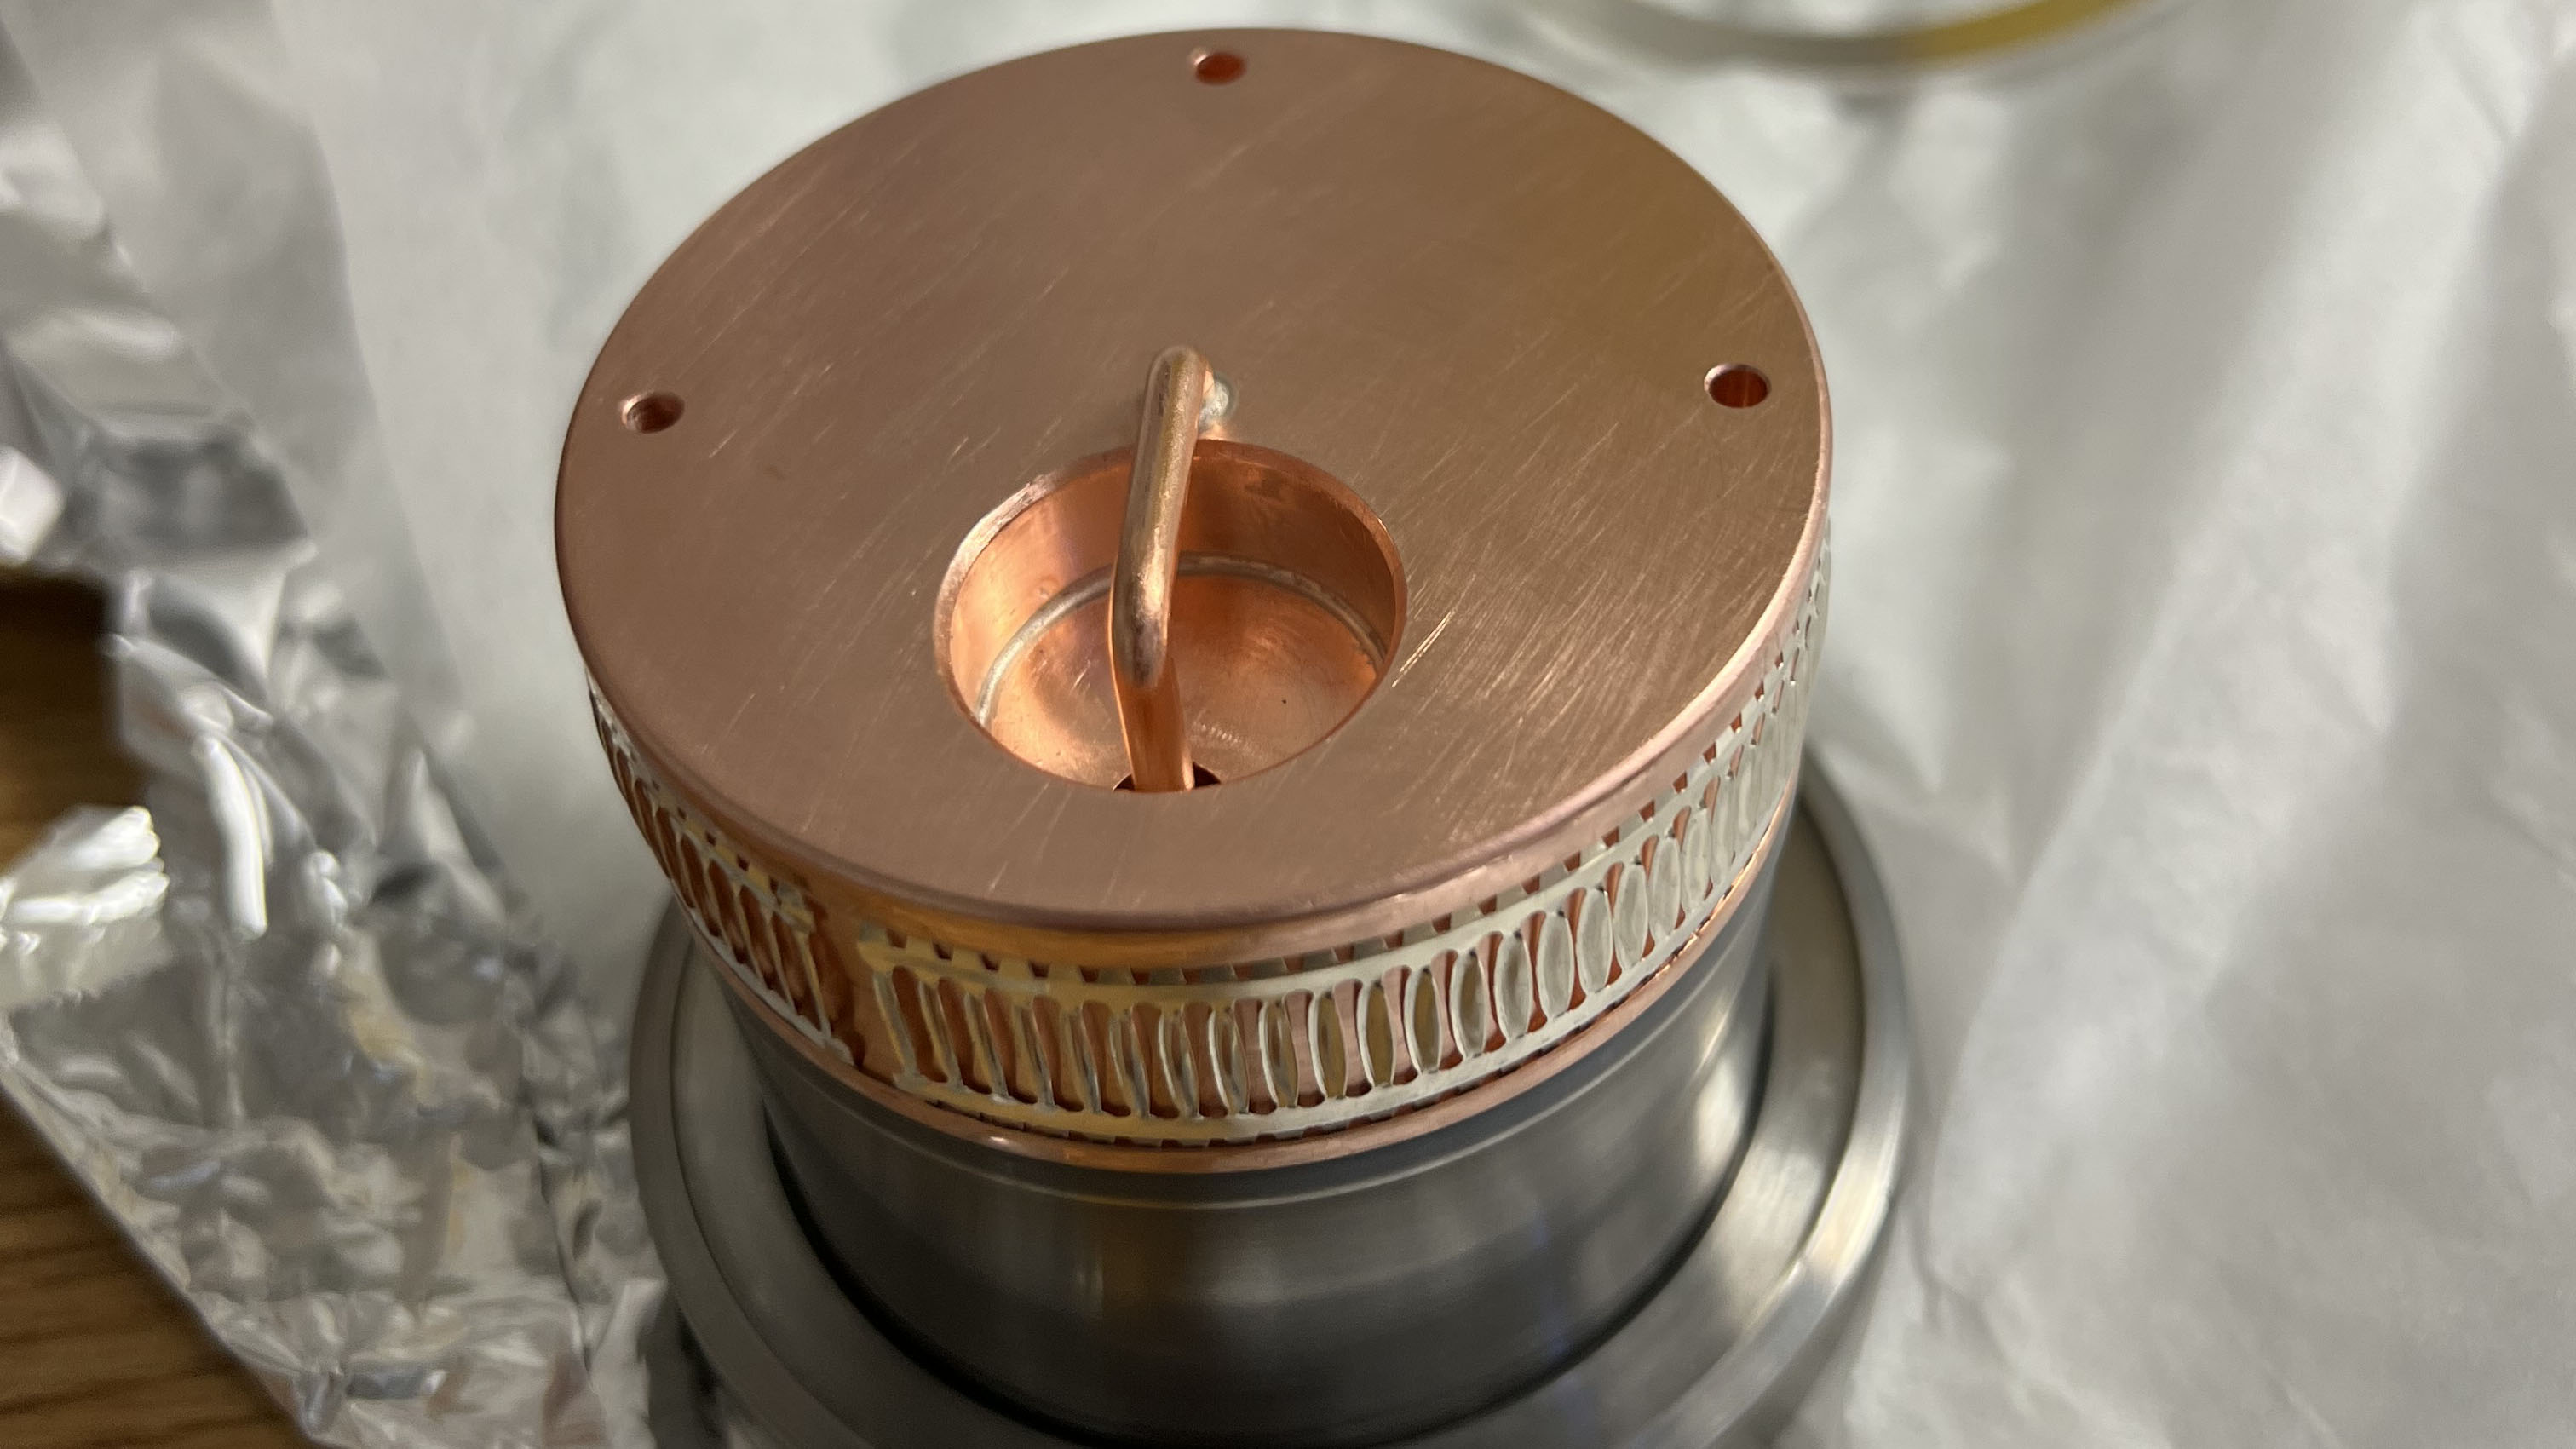 A remade chopper coupler - a copper cylinder attached to a stainless steel joint - completed